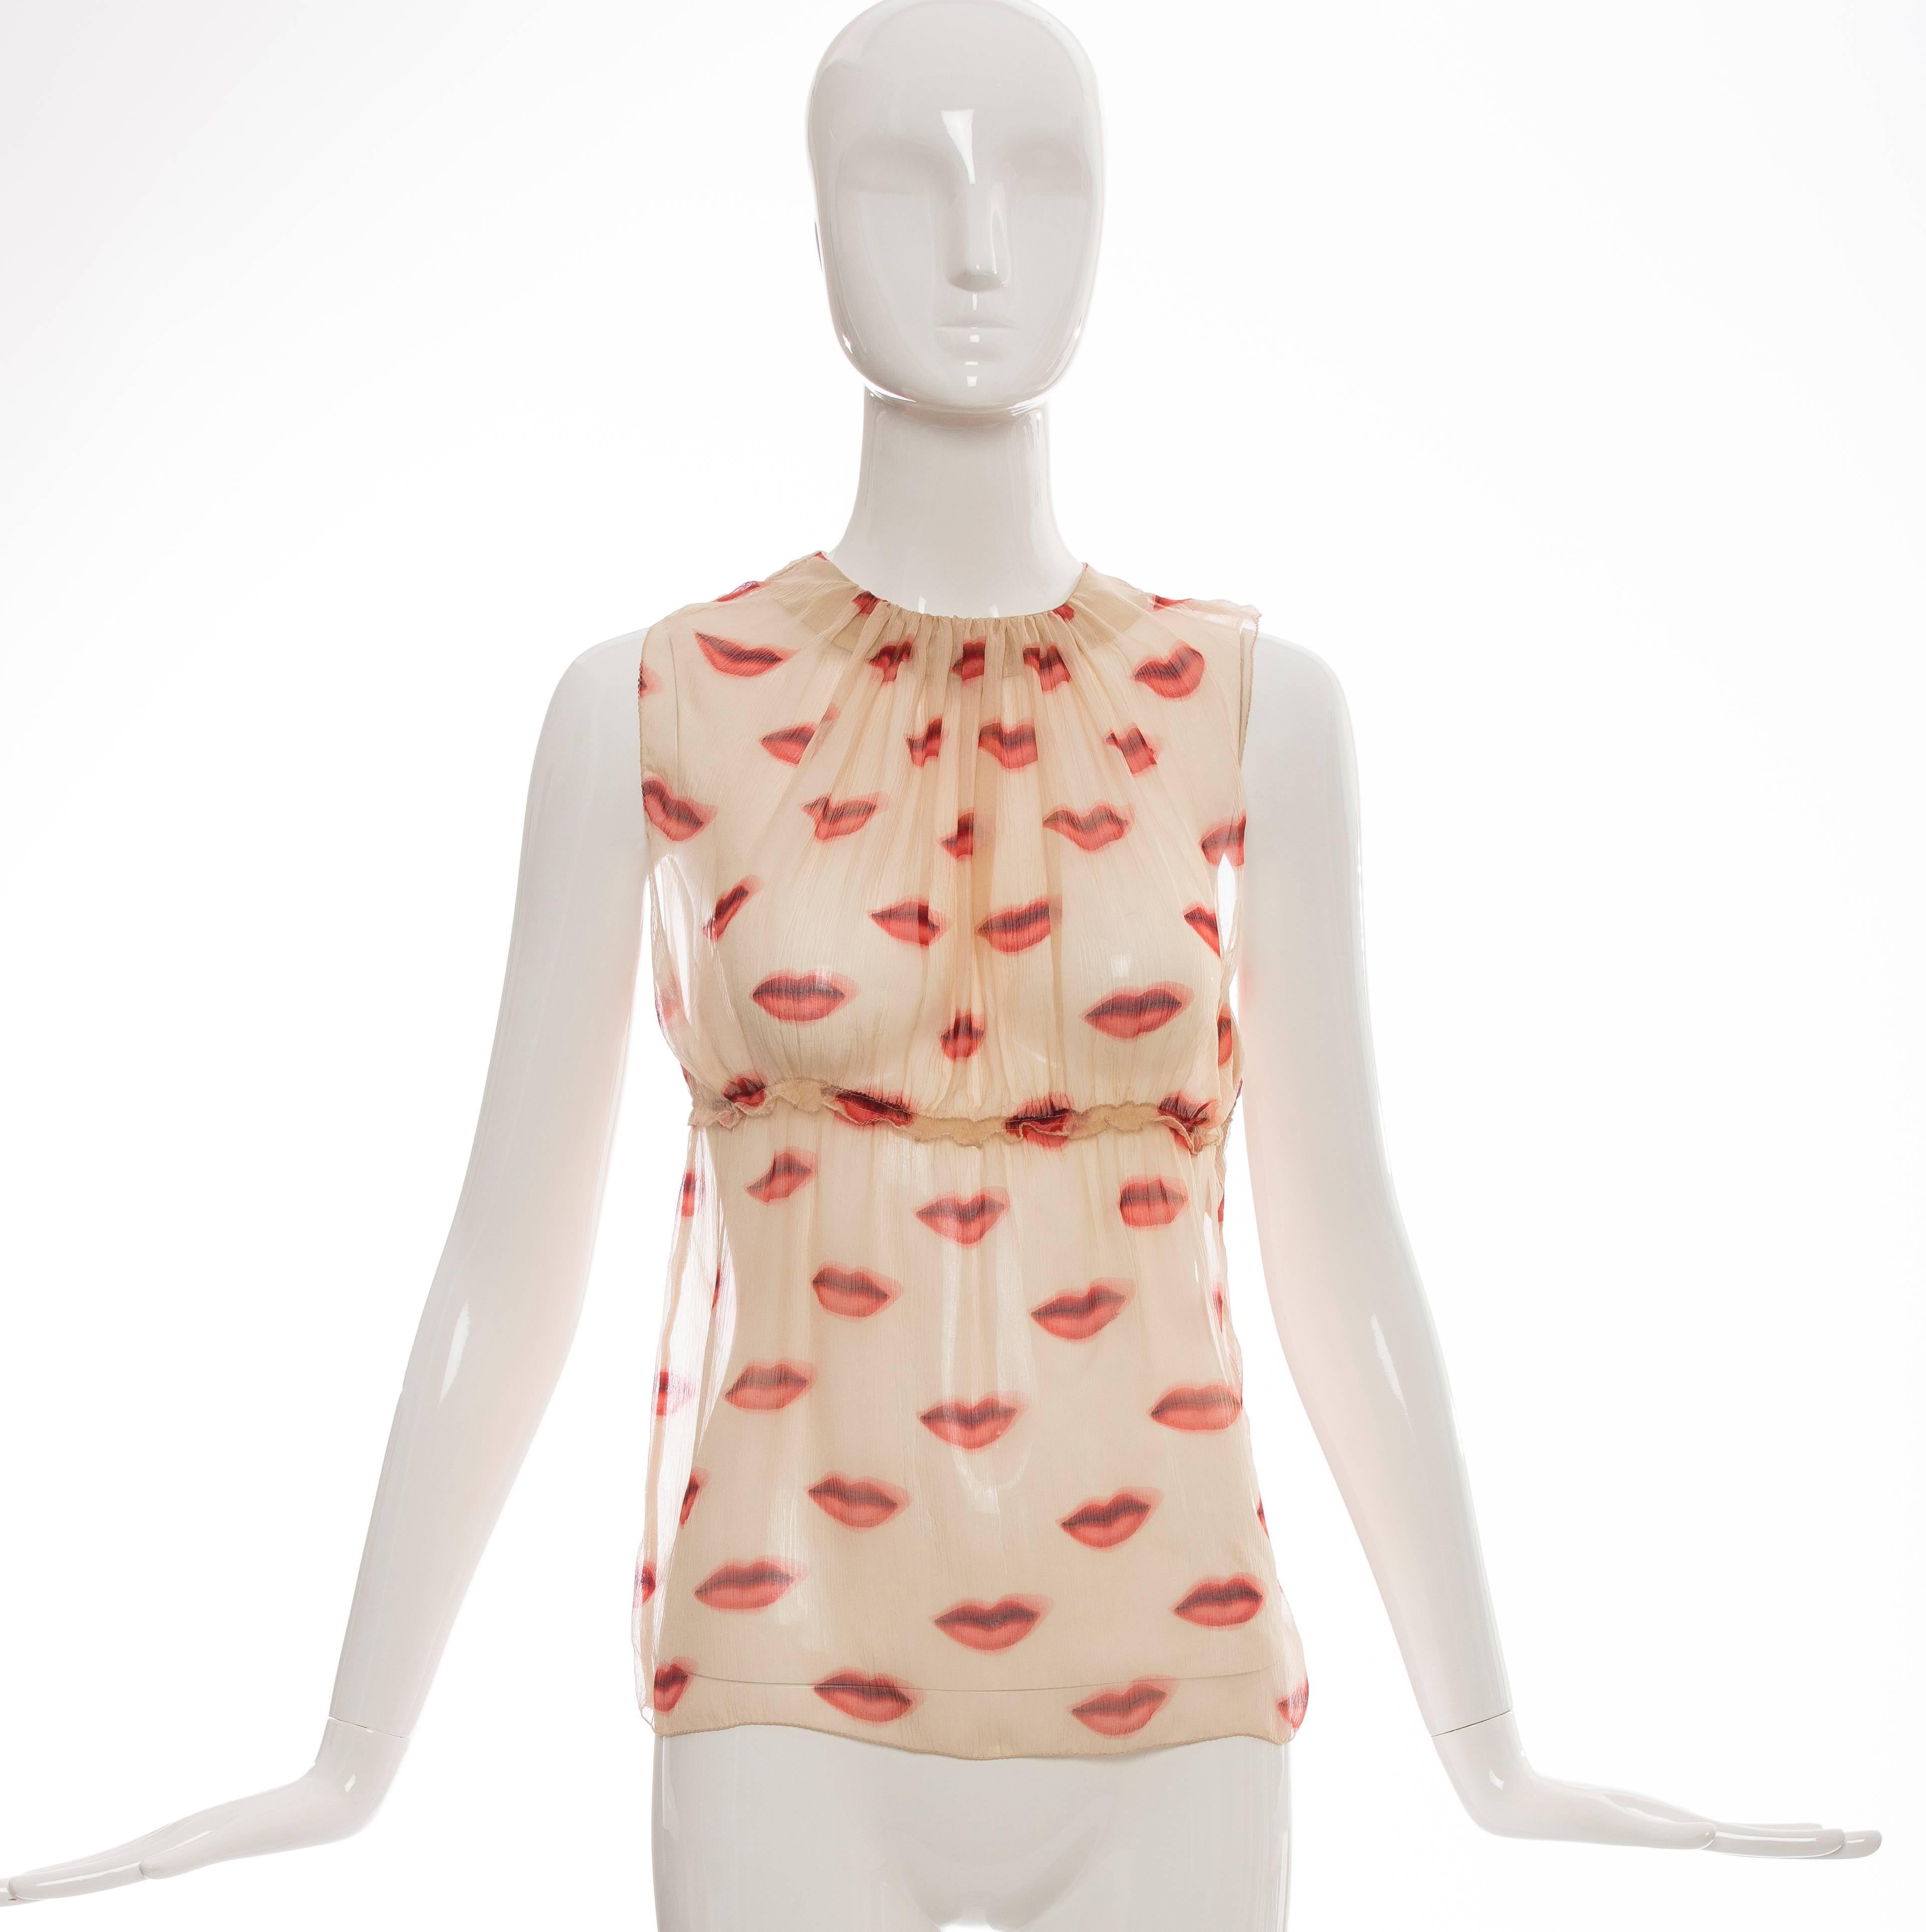 Prada, Spring - Summer 2000 sleeveless silk chiffon top with lip print throughout, crew neck, pleating detail at front, ruffle waistband and hidden side snap closures.

IT. 38
US. 2

 Bust 28”, Waist 24”, Length 24”